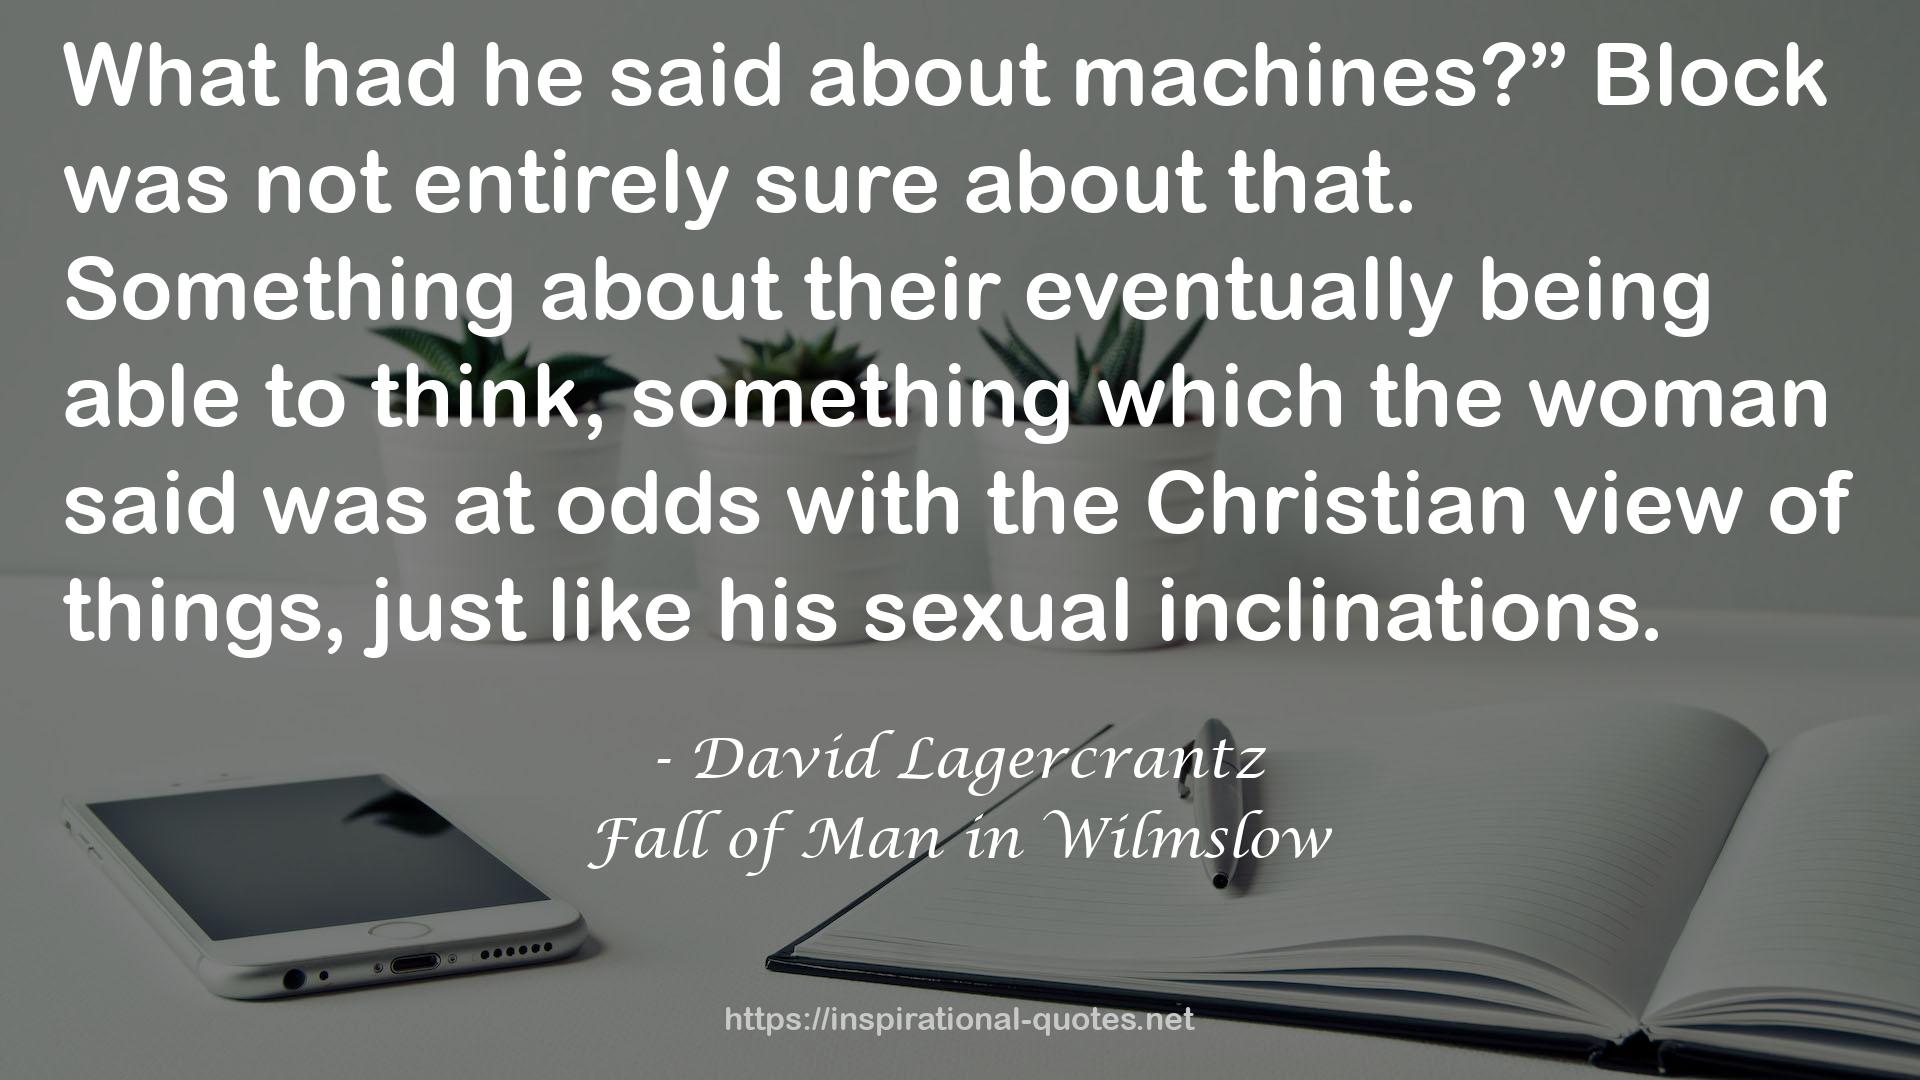 Fall of Man in Wilmslow QUOTES